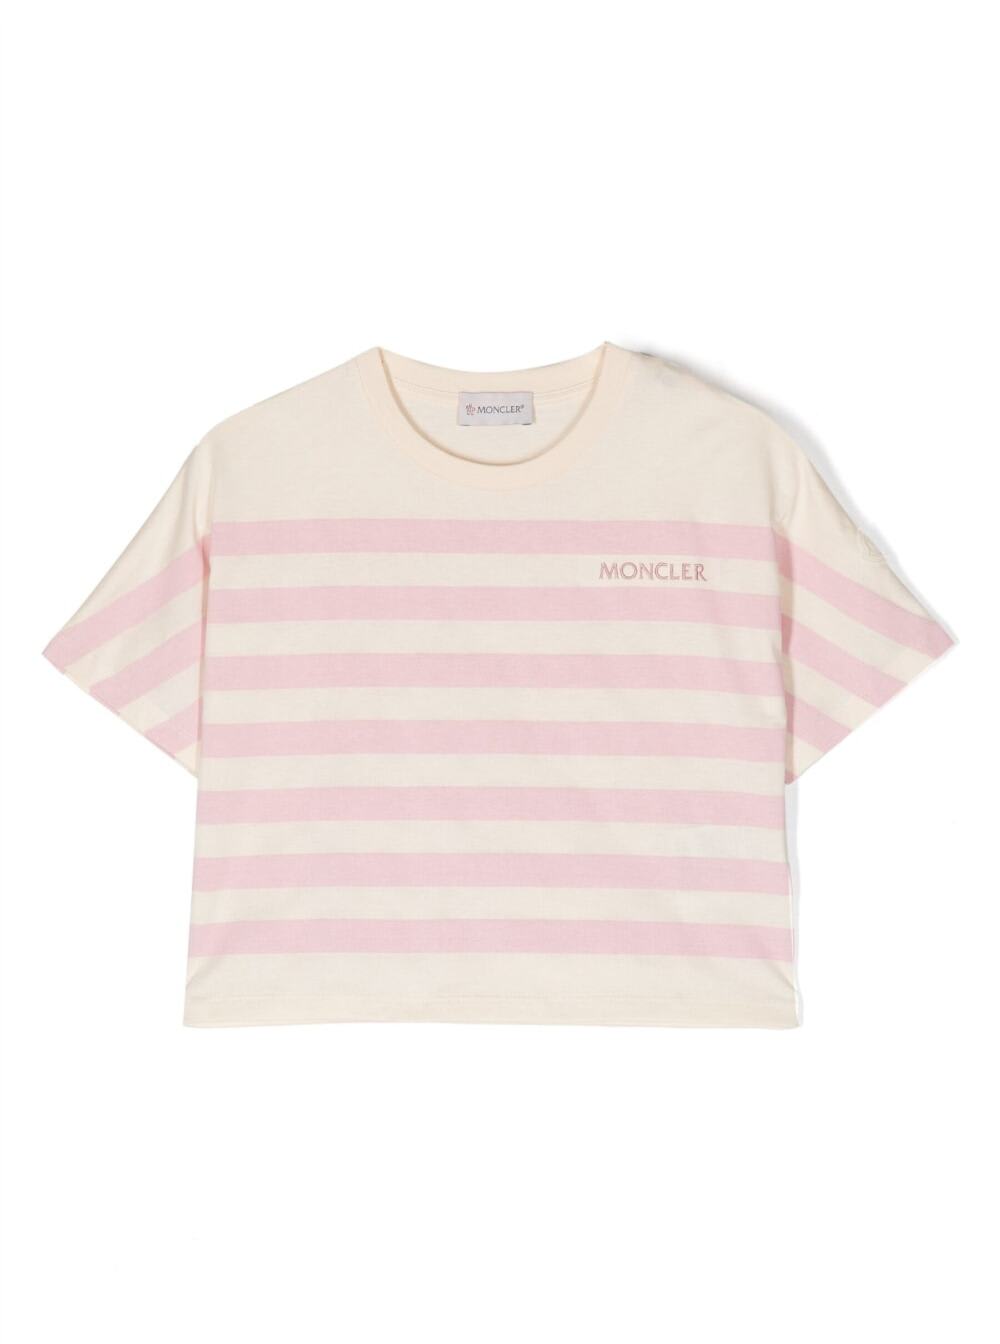 MONCLER PINK AND WHITE CREWNECK STRIPED T-SHIRT IN COTTON GIRL